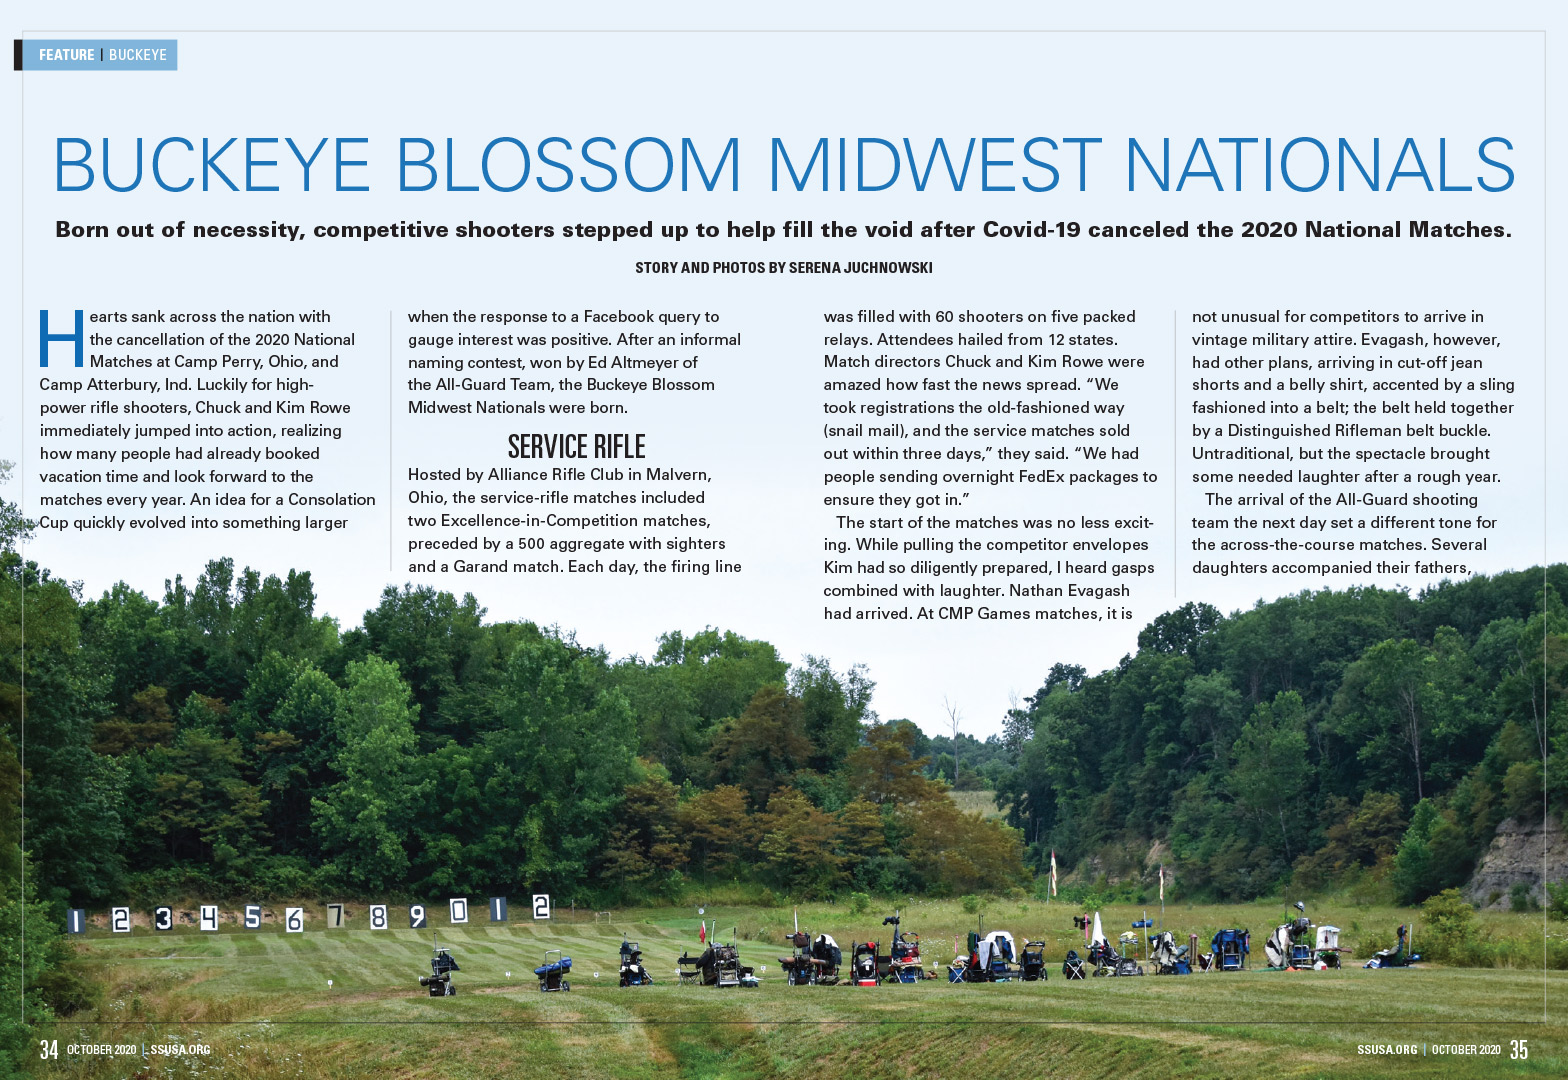 2020 Buckeye Blossom Midwest Nationals